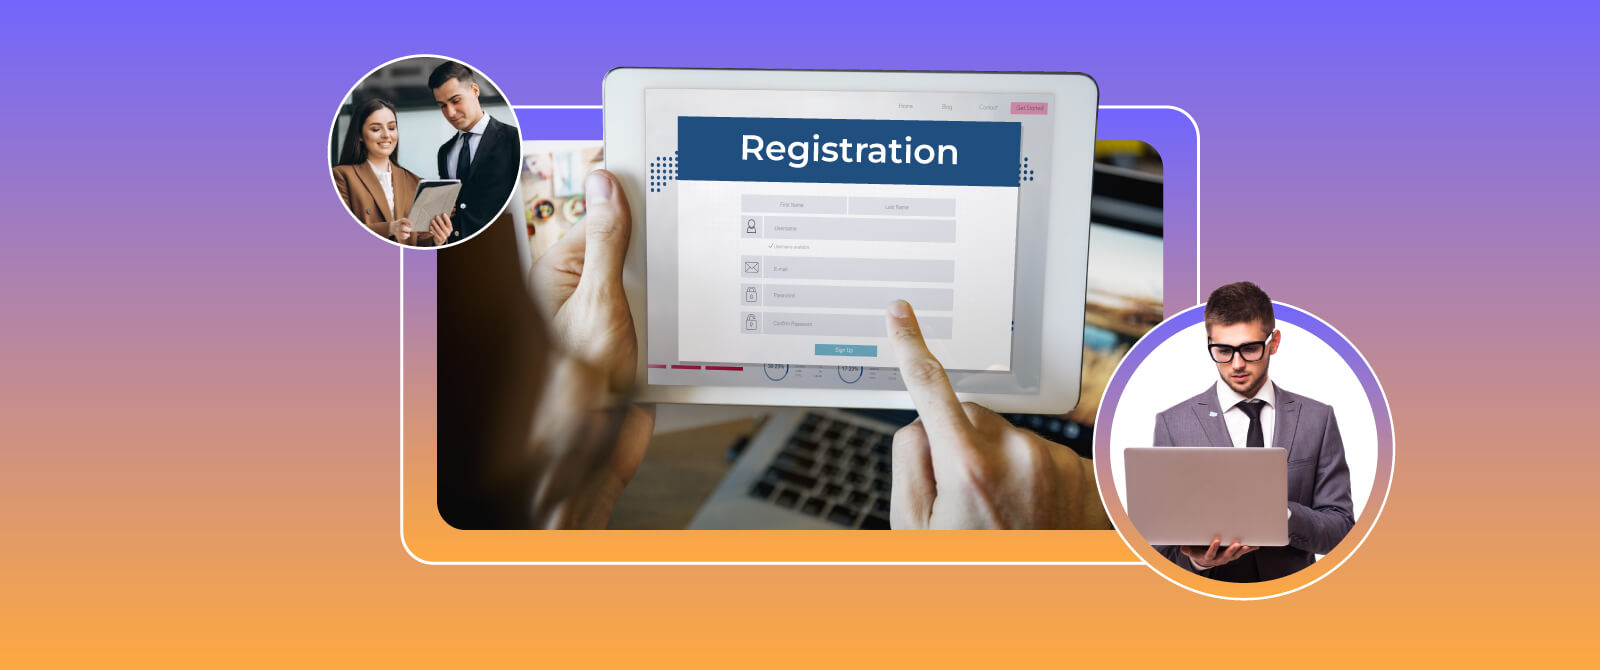 How to Build a Corporate Event Website for Registration Management: A Guide